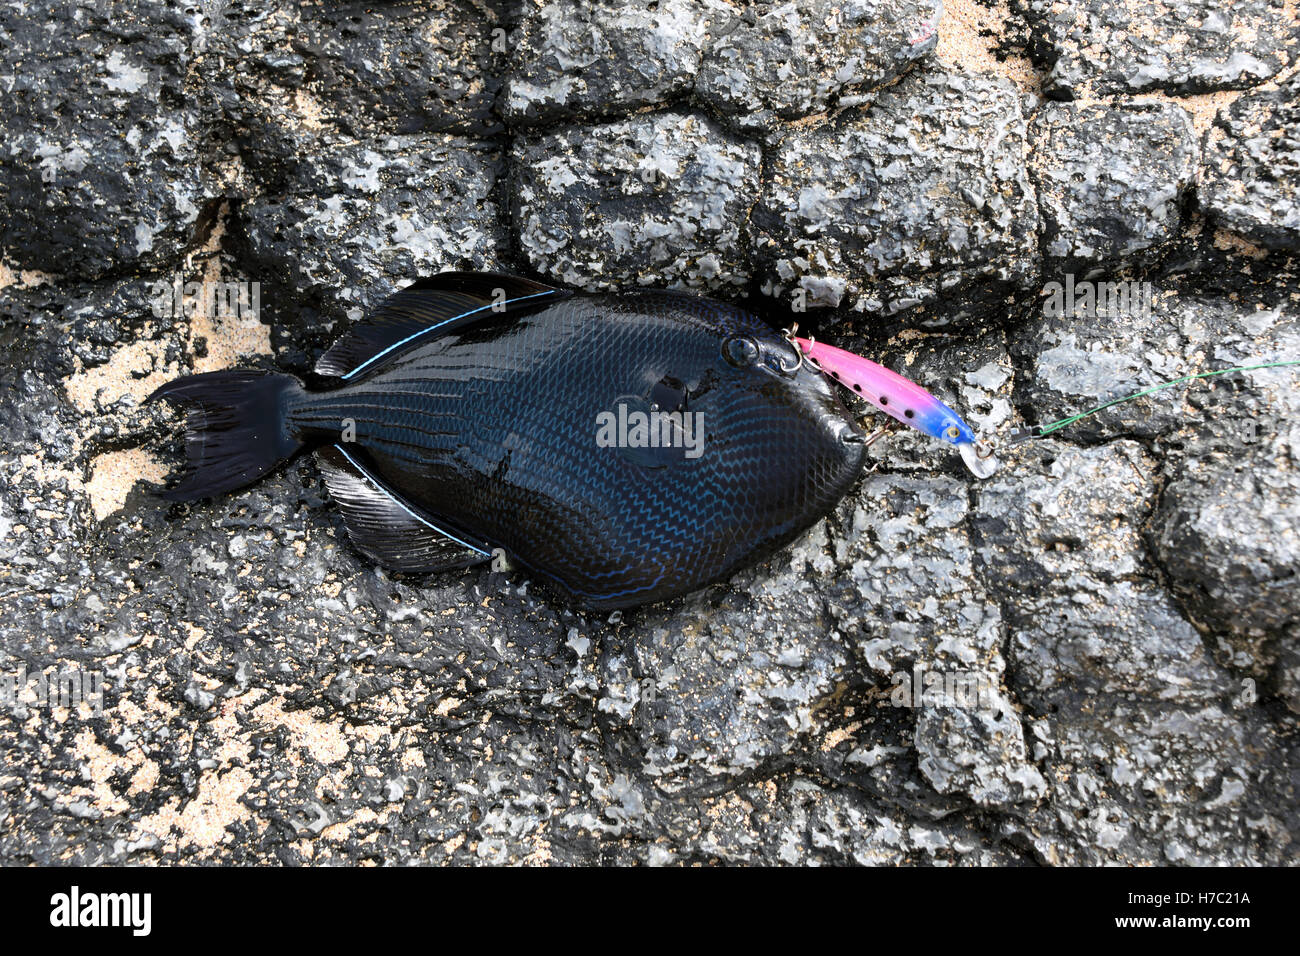 A Black Triggerfish (Melichthys niger) caught from the beach in Comfortless Cove on Ascension Island Stock Photo